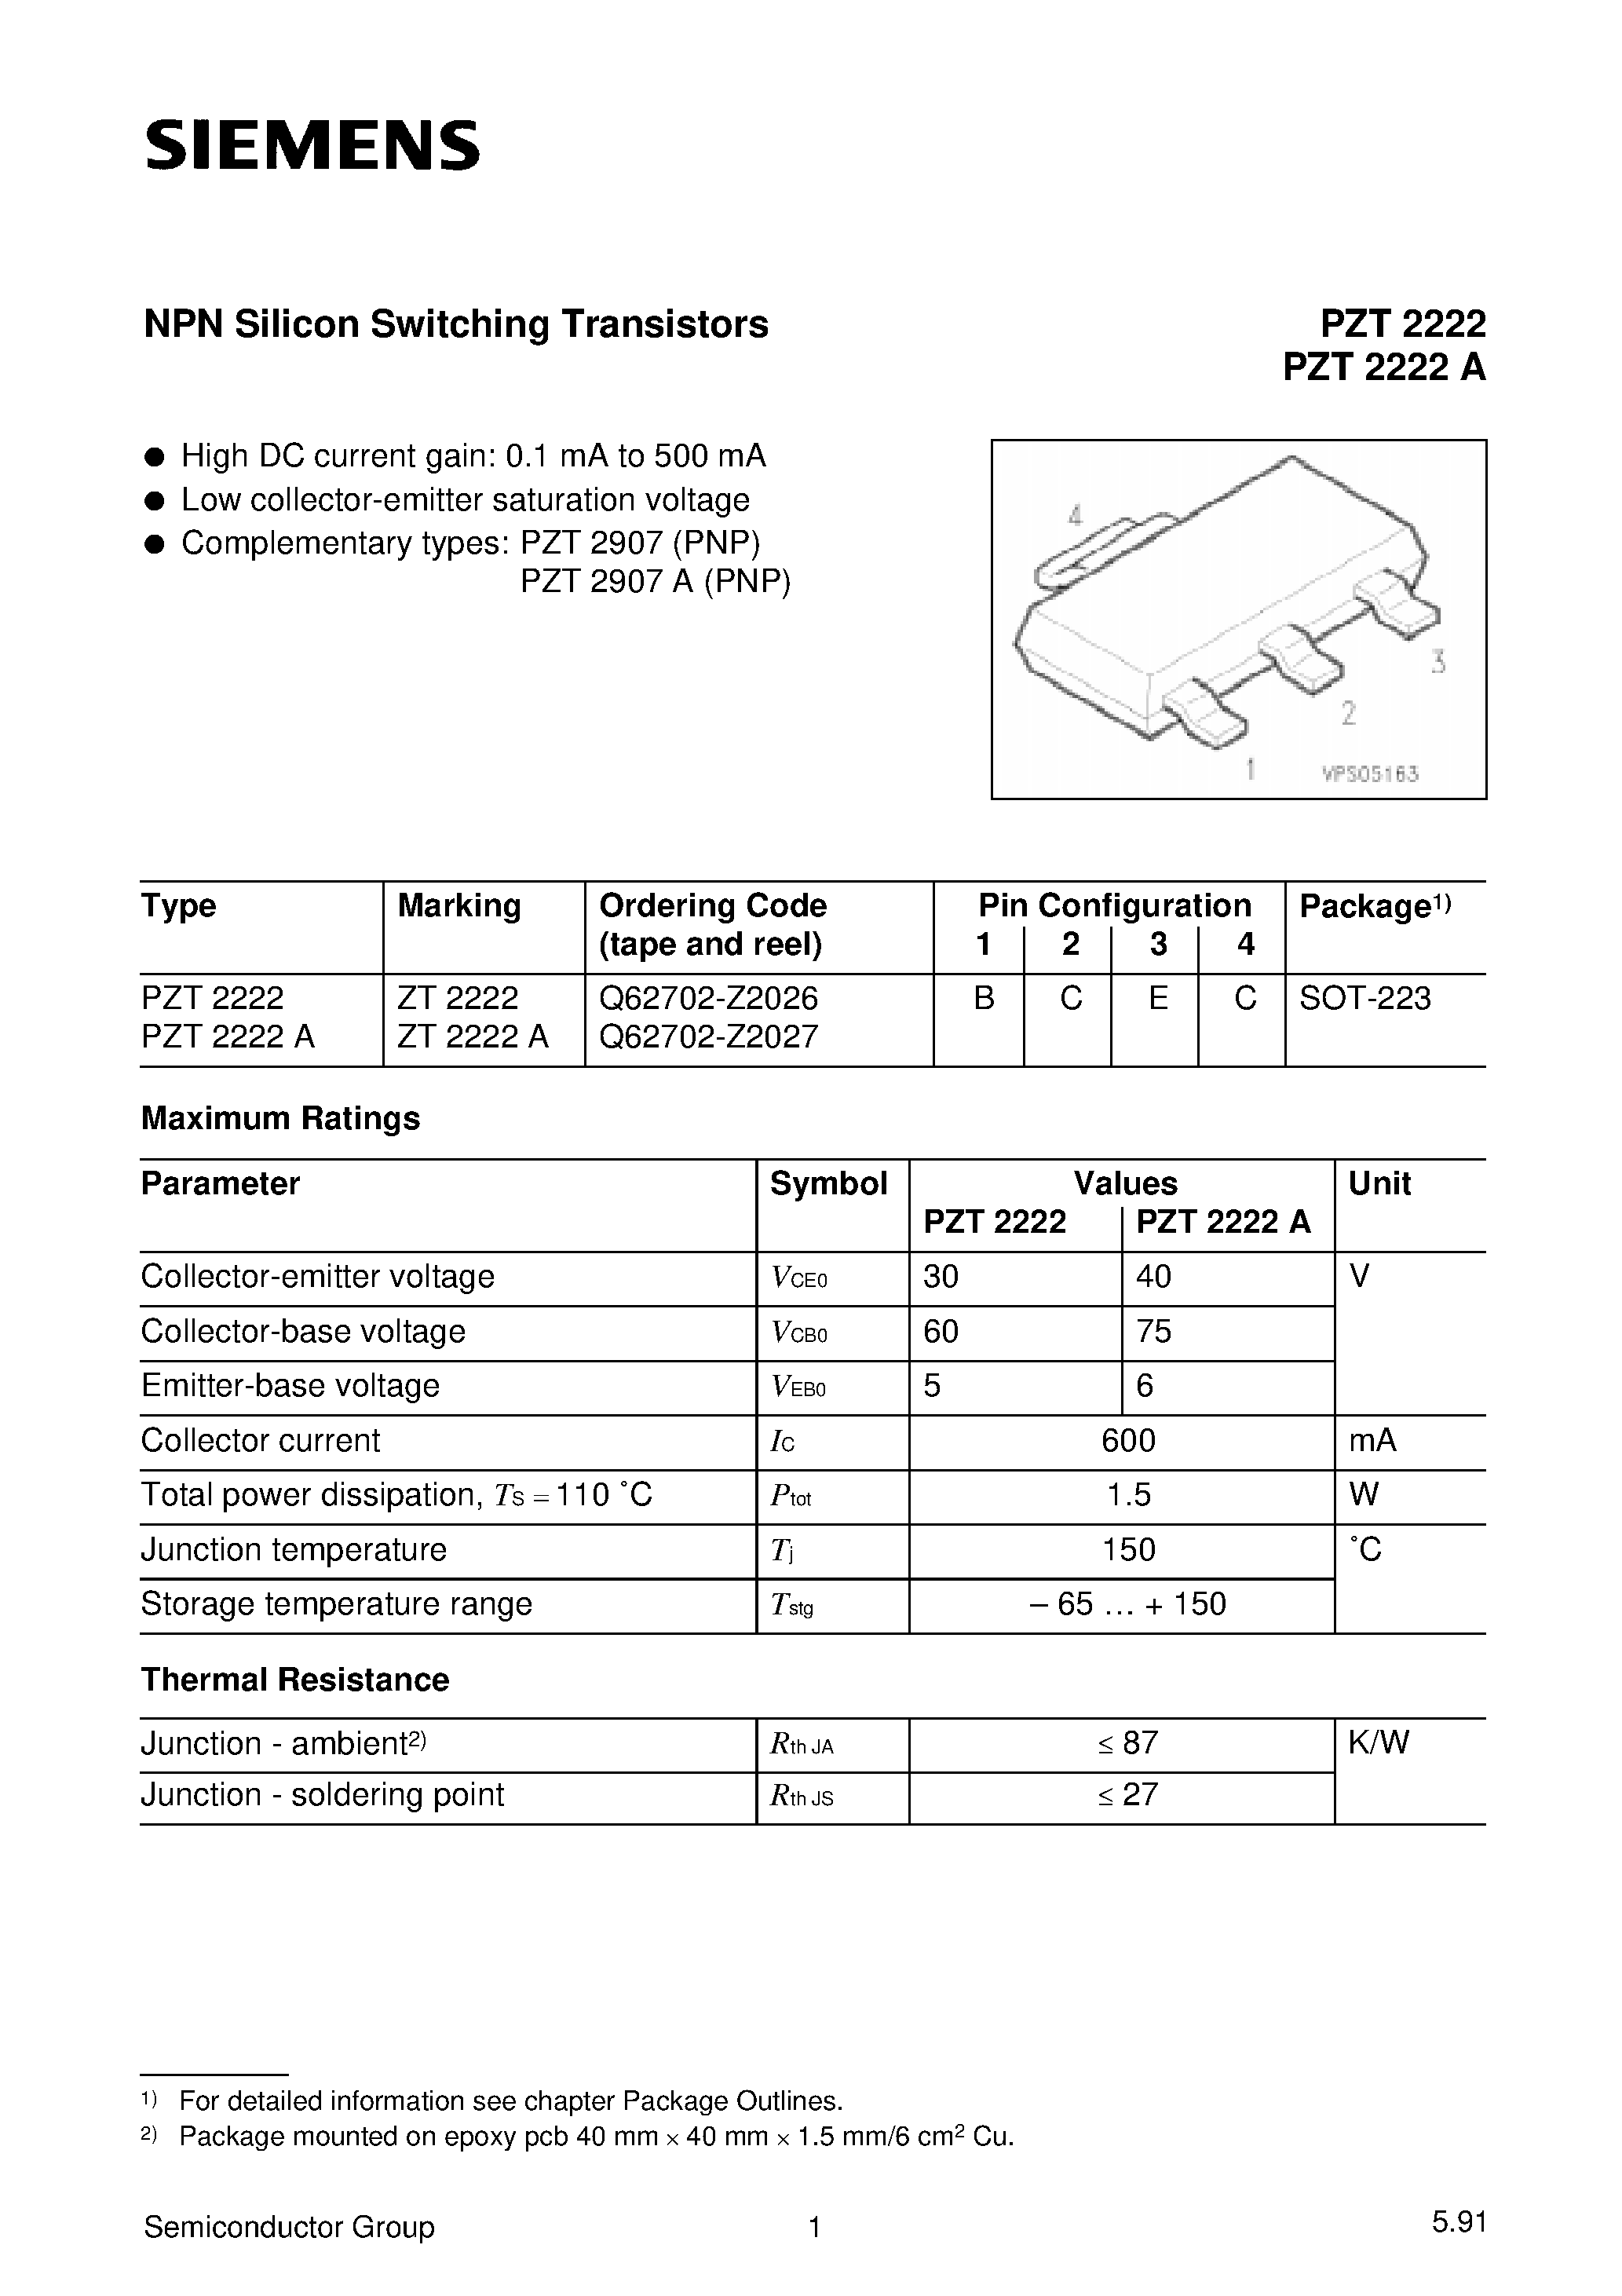 Datasheet PZT2222A - NPN Silicon Switching Transistors page 1